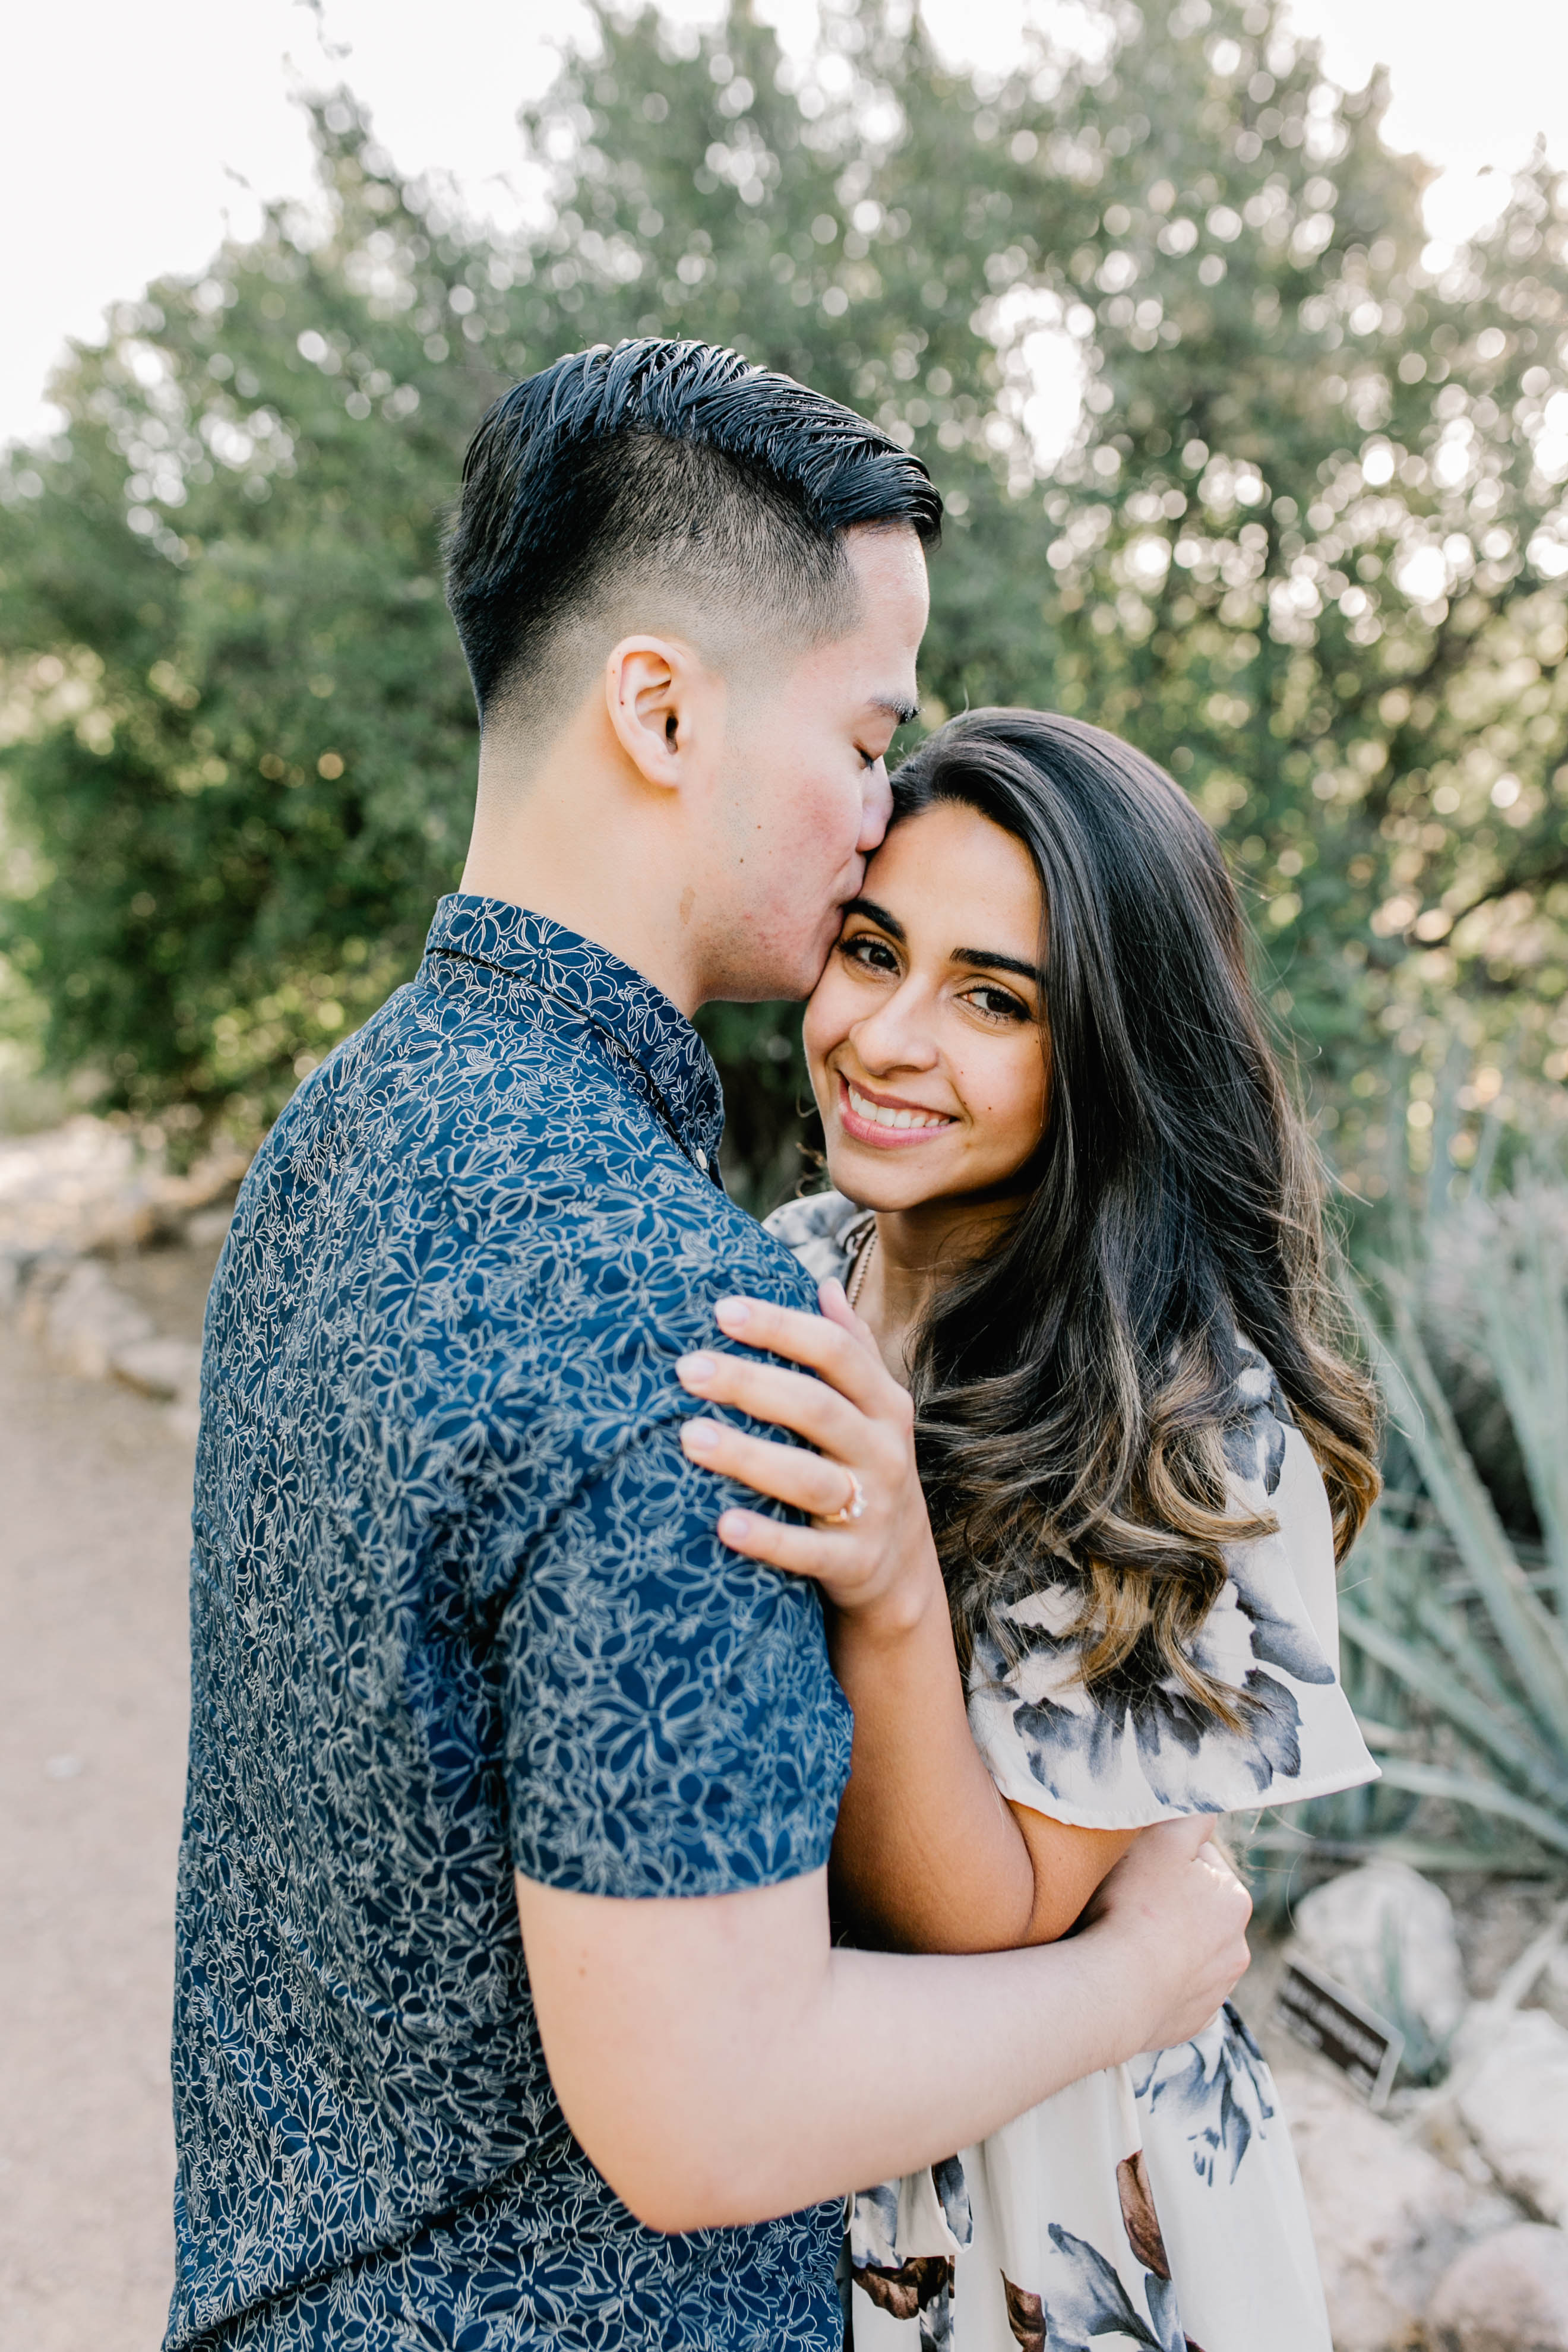 Viet & Ari’s Engagement Session | Karlie Colleen Photography